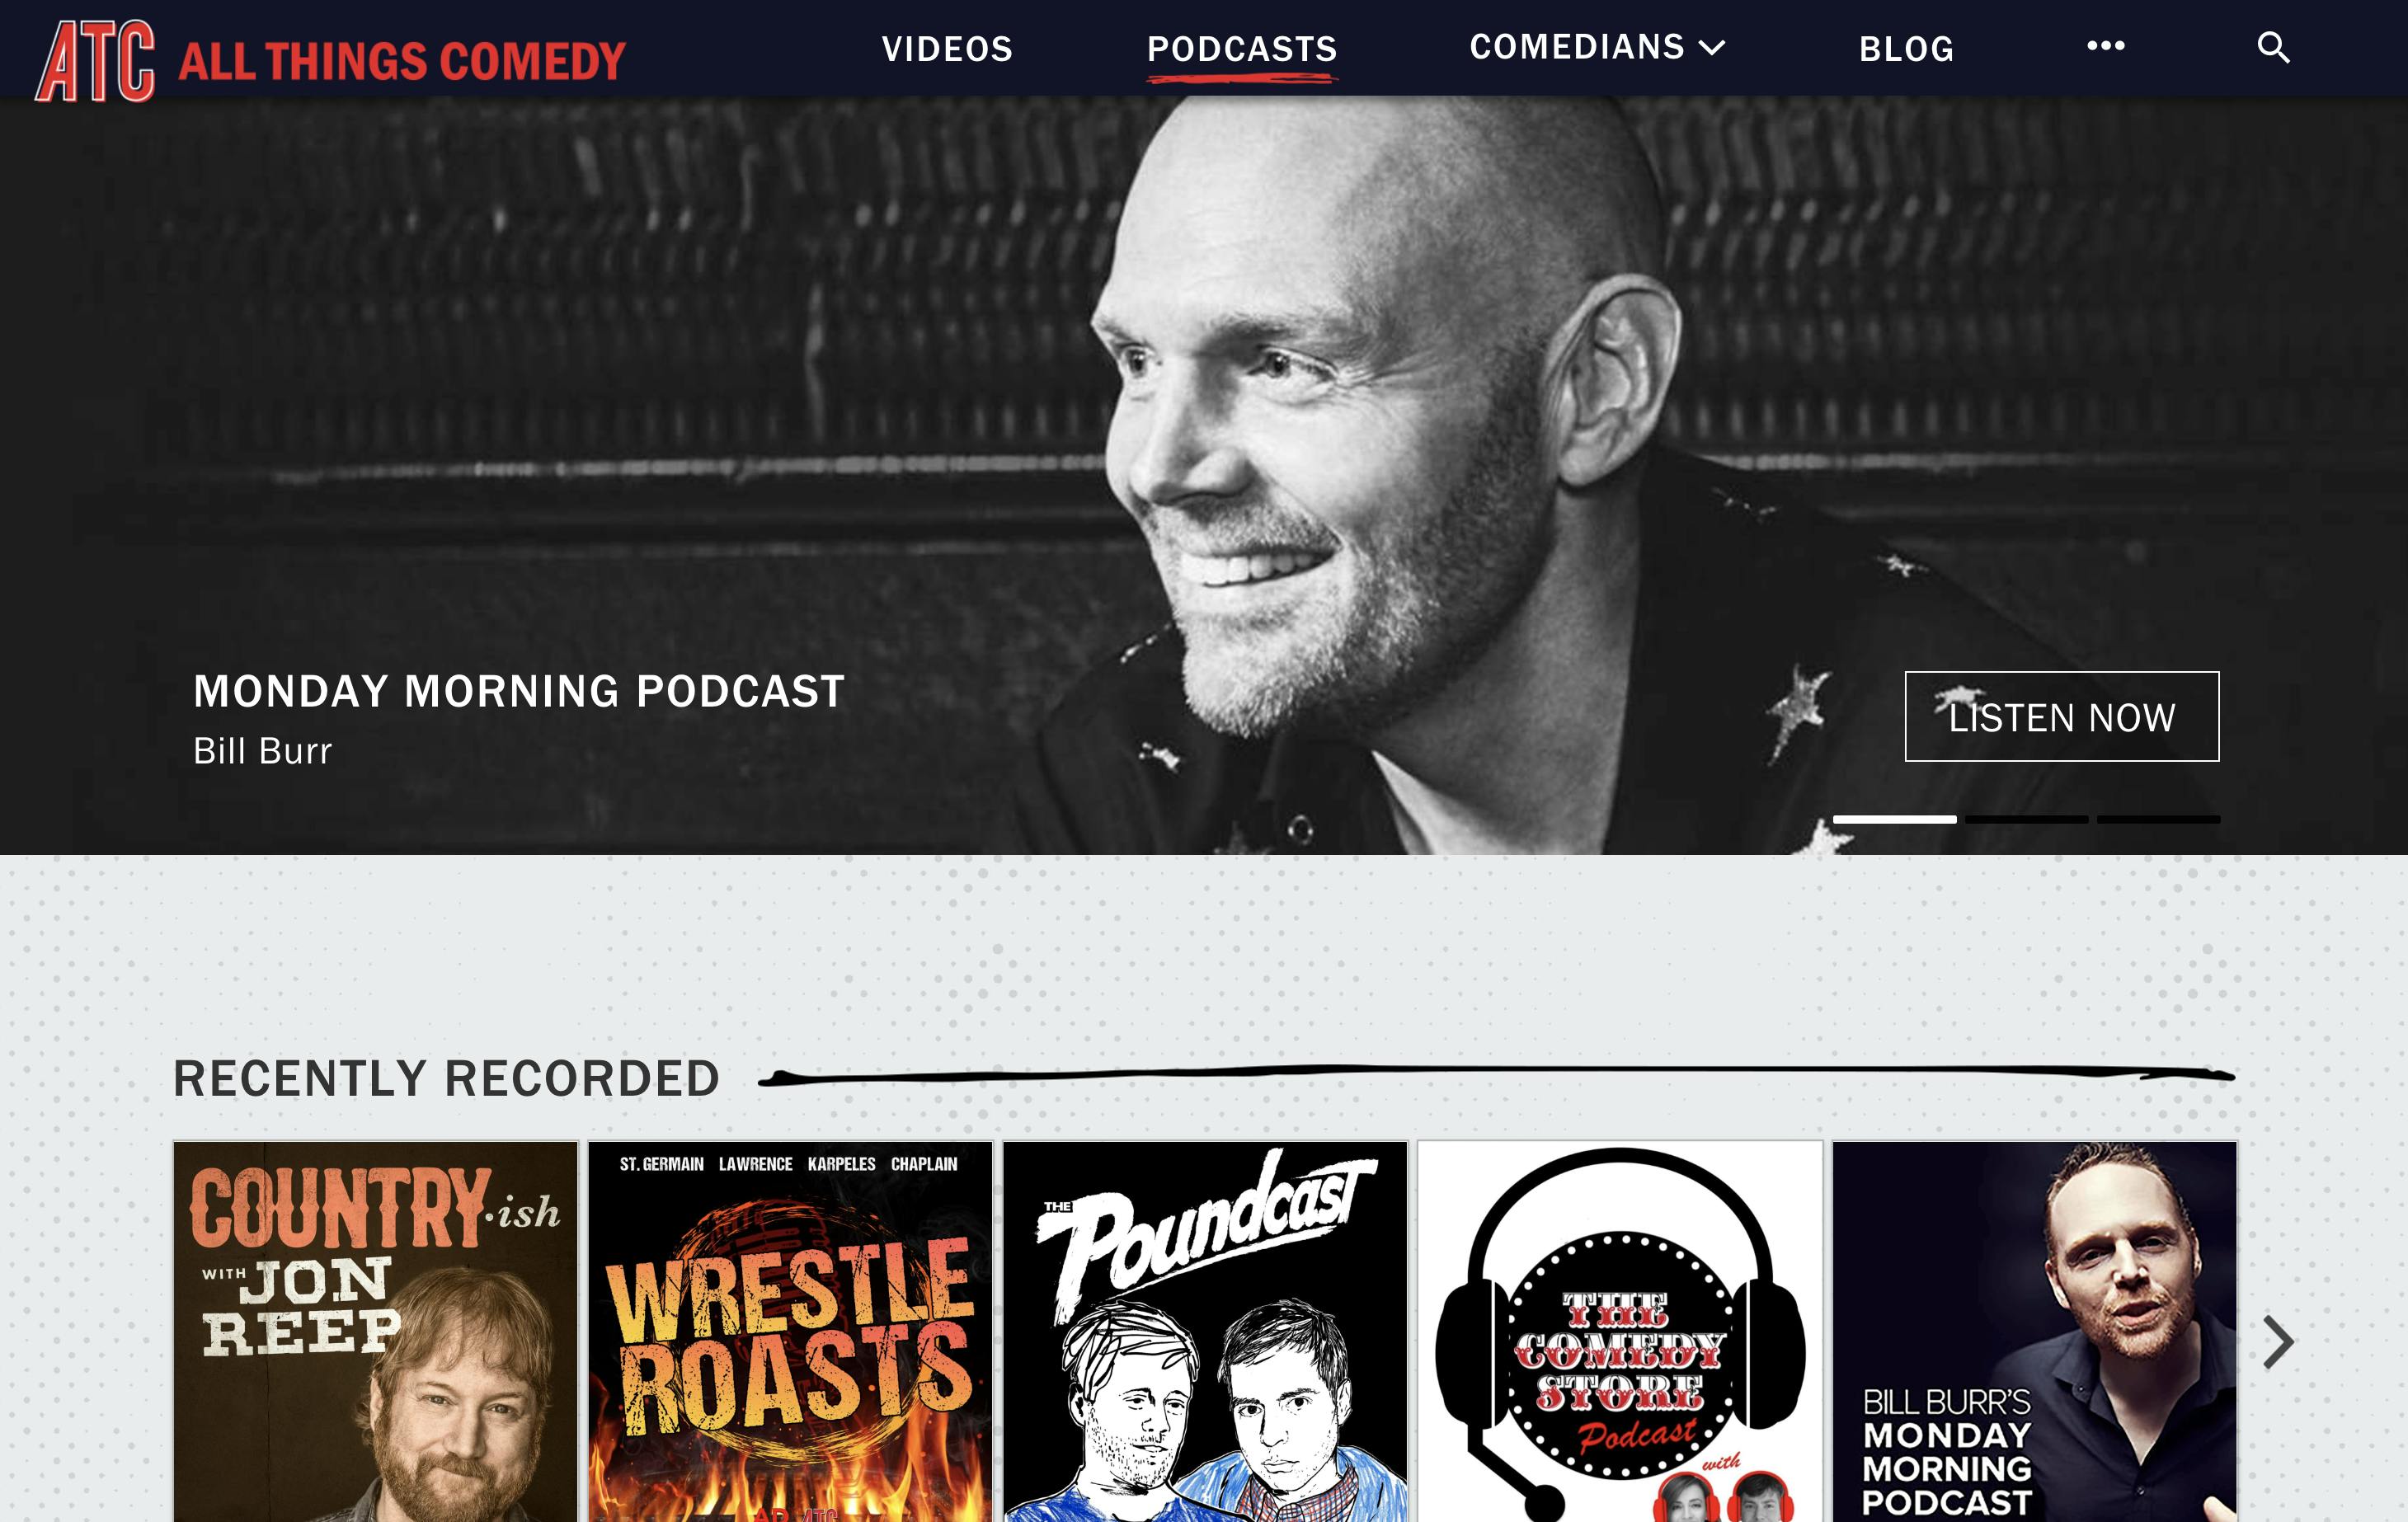 All Things Comedy homepage featuring header image of Bill Burr's Monday Morning Podcast